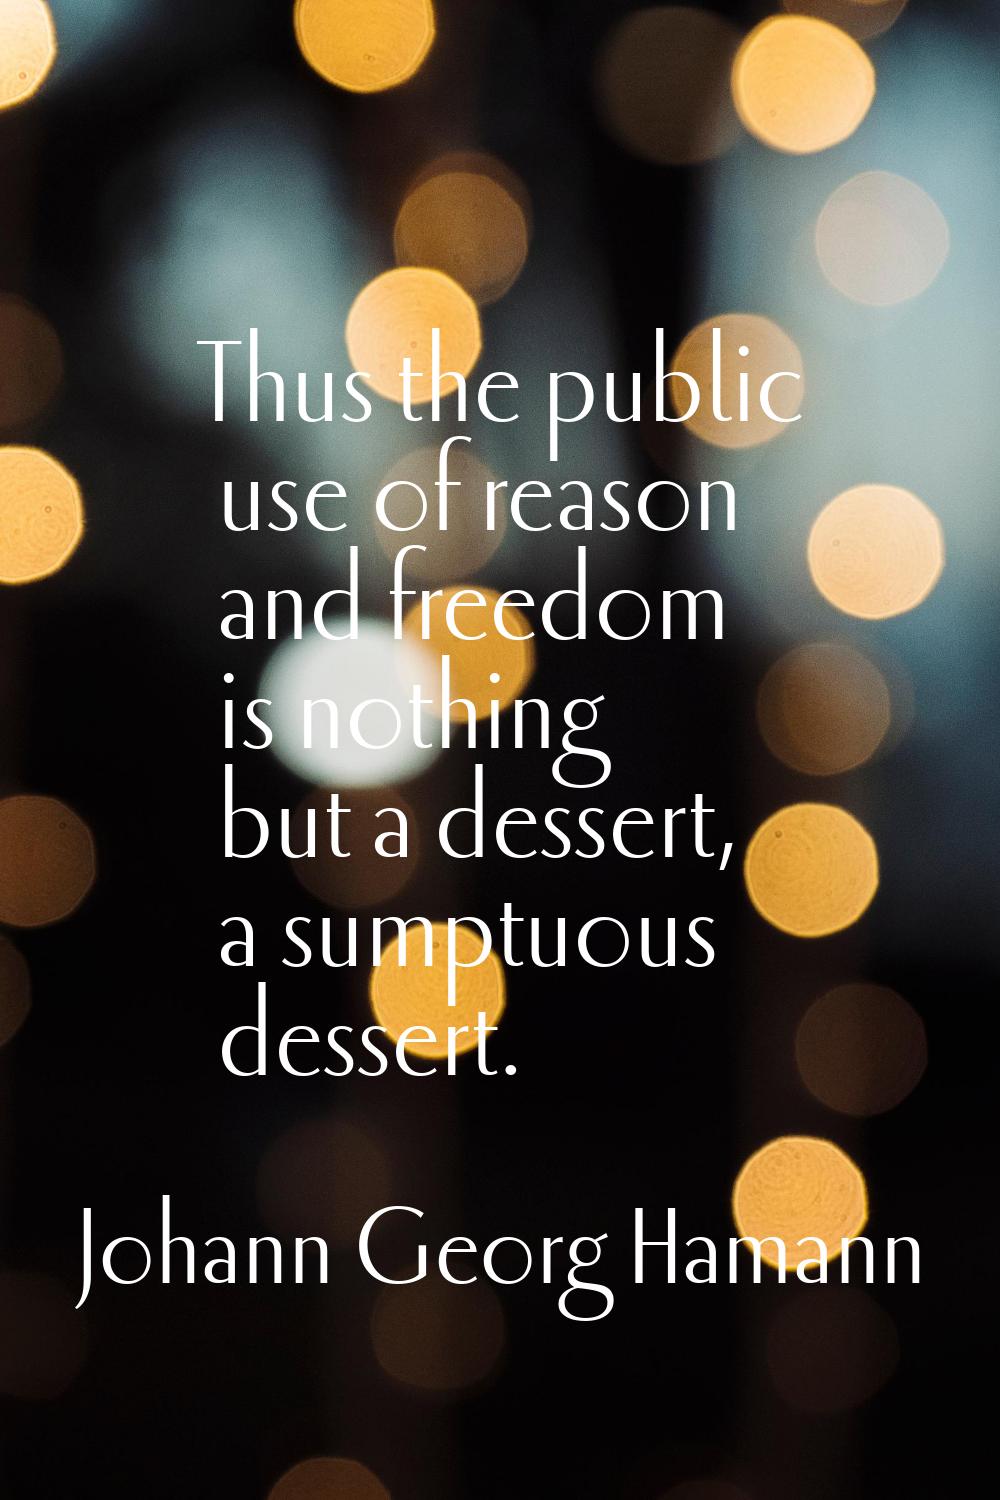 Thus the public use of reason and freedom is nothing but a dessert, a sumptuous dessert.